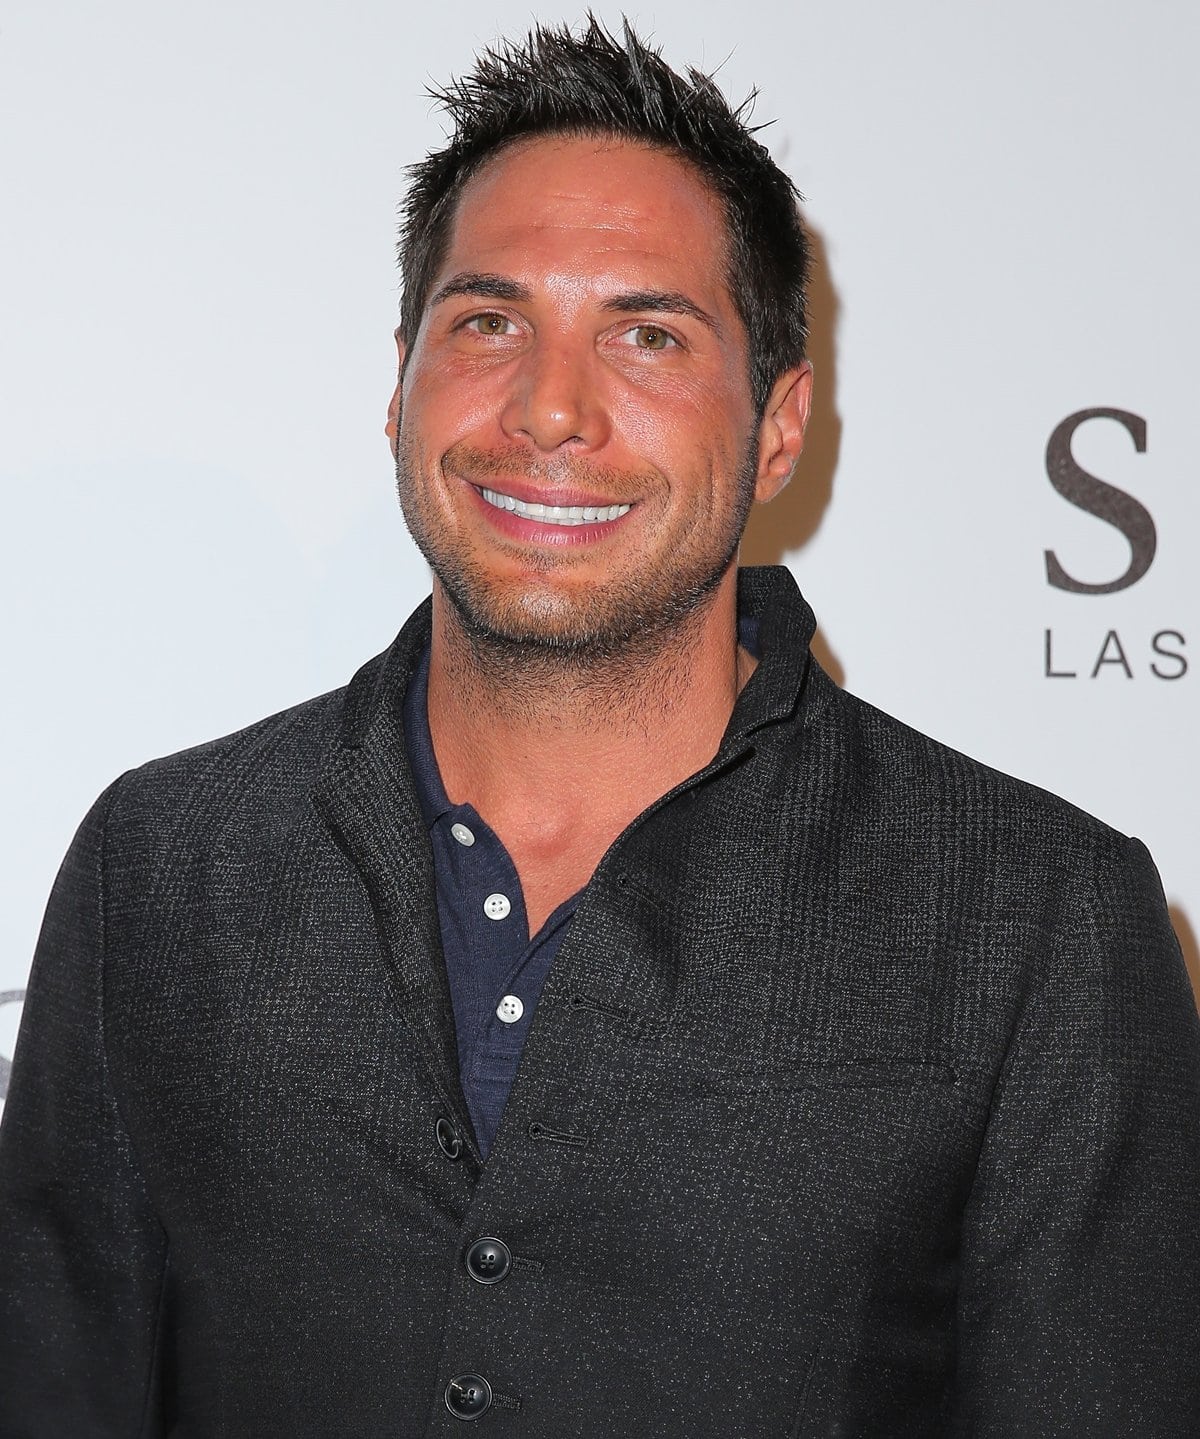 Businessman and film producer Joe Francis is best known for launching the Girls Gone Wild entertainment brand